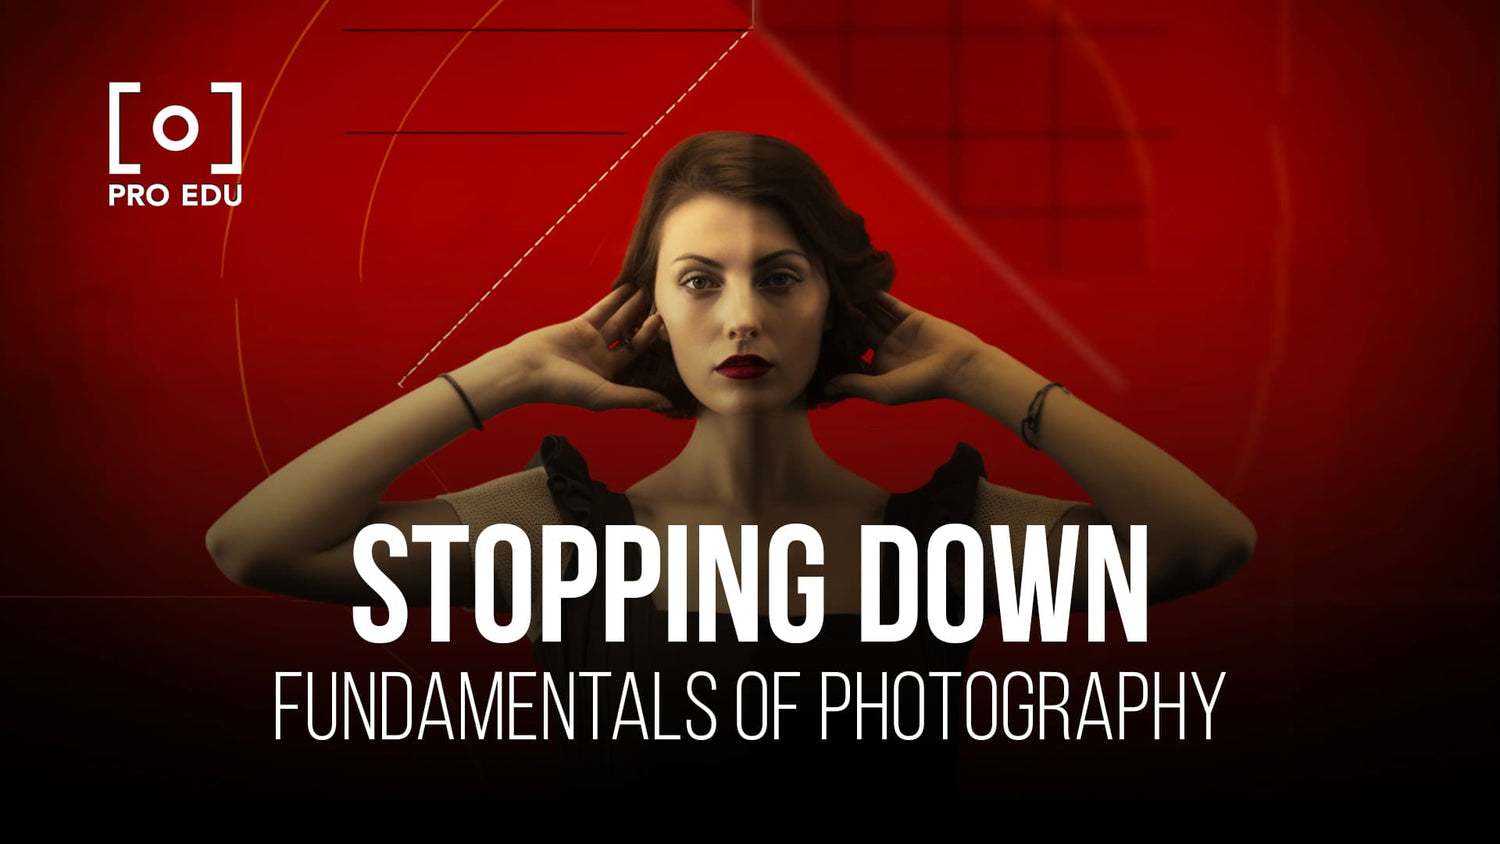 Controlling depth of field and exposure by stopping down in photography